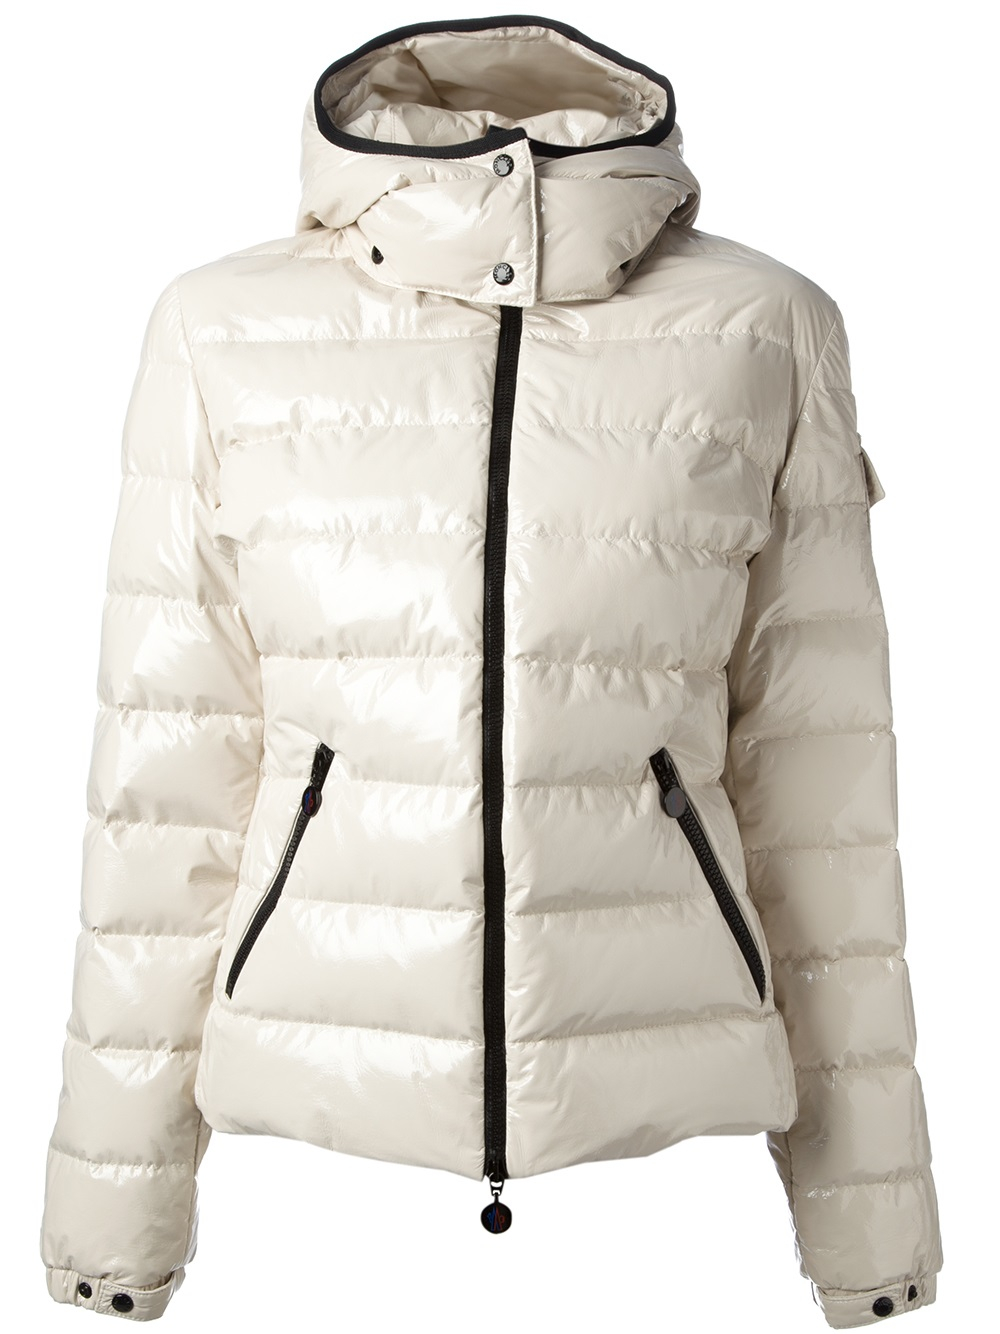 White Moncler Coat on Sale, 69% OFF | www.ilpungolo.org